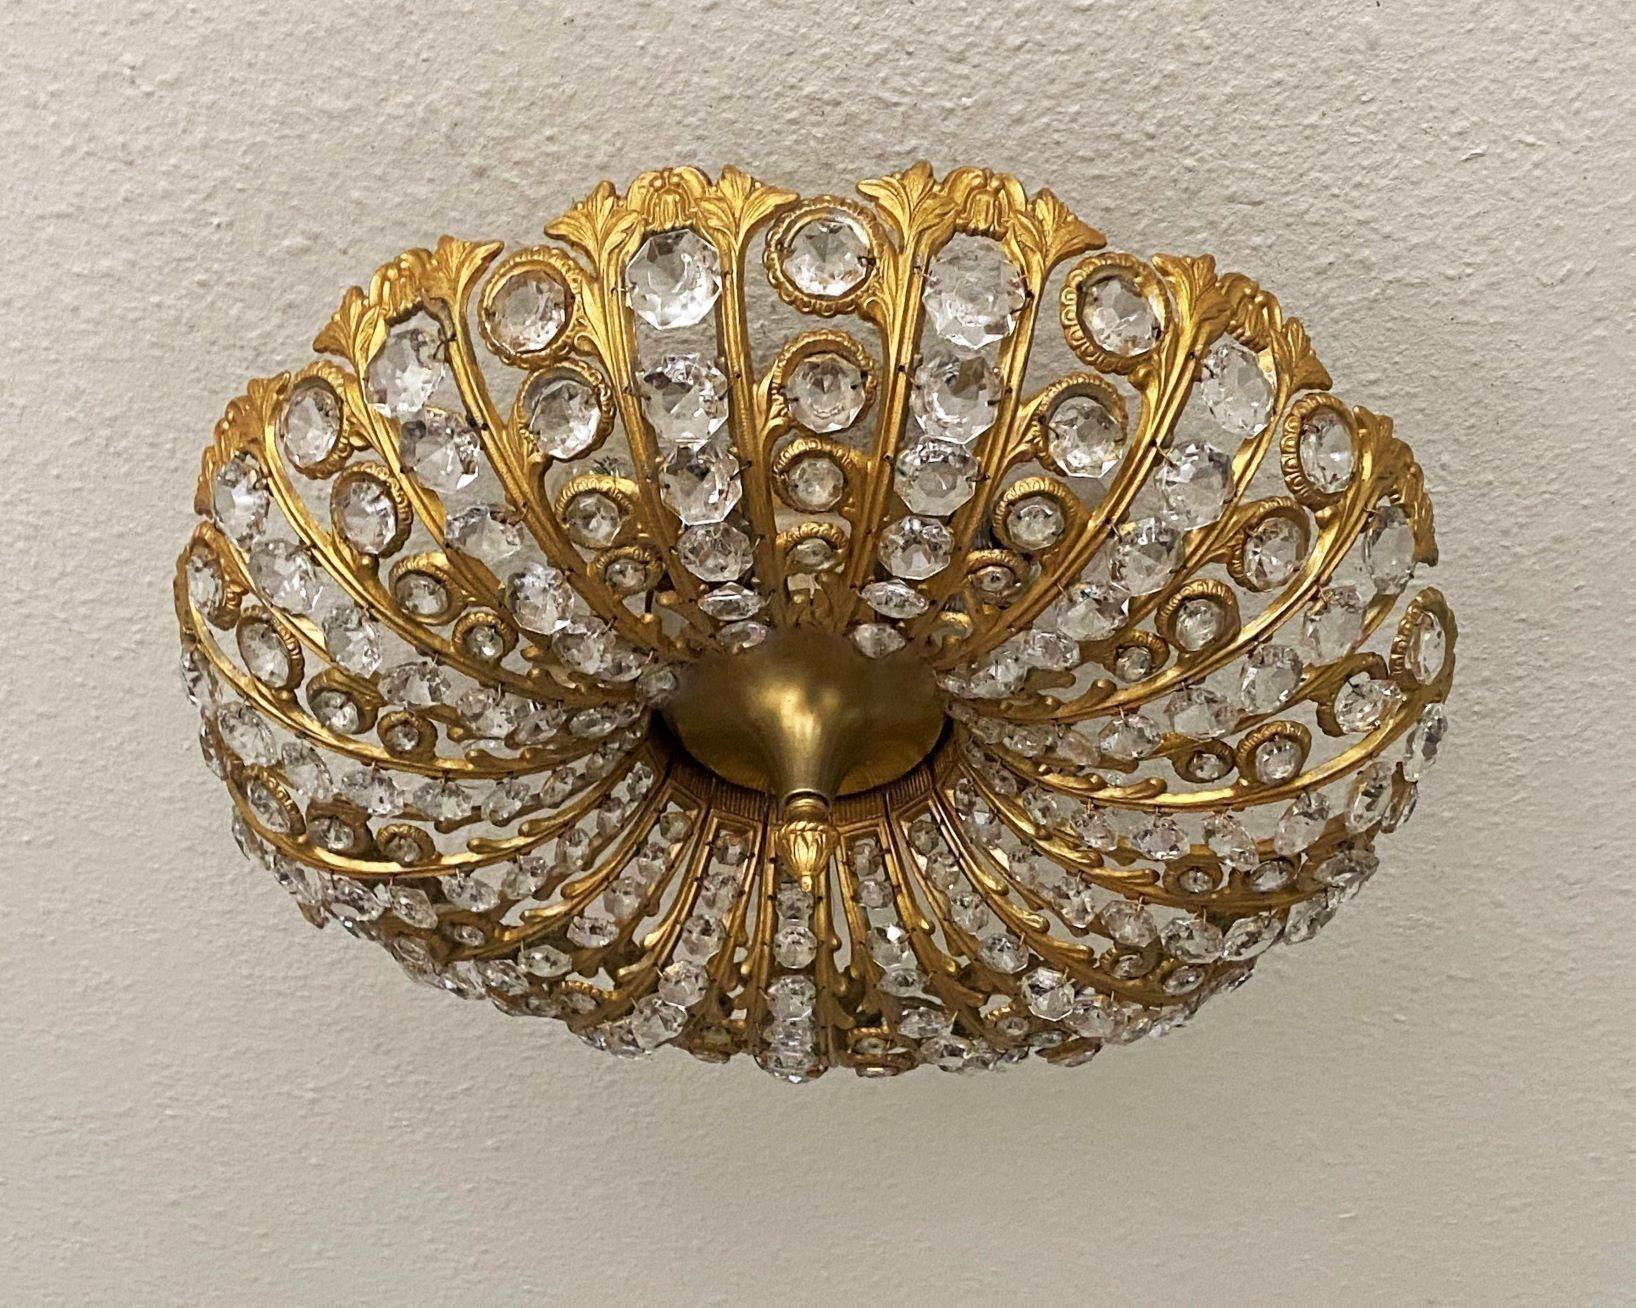 A beautiful, large Art Deco faceted crystal and cast gilt bronze flush mount, Austria, 1950s. With five light sockets providing a bright, warm light from the ceiling. This wonderful piece is in excellent vintage condition, complete, the crystals